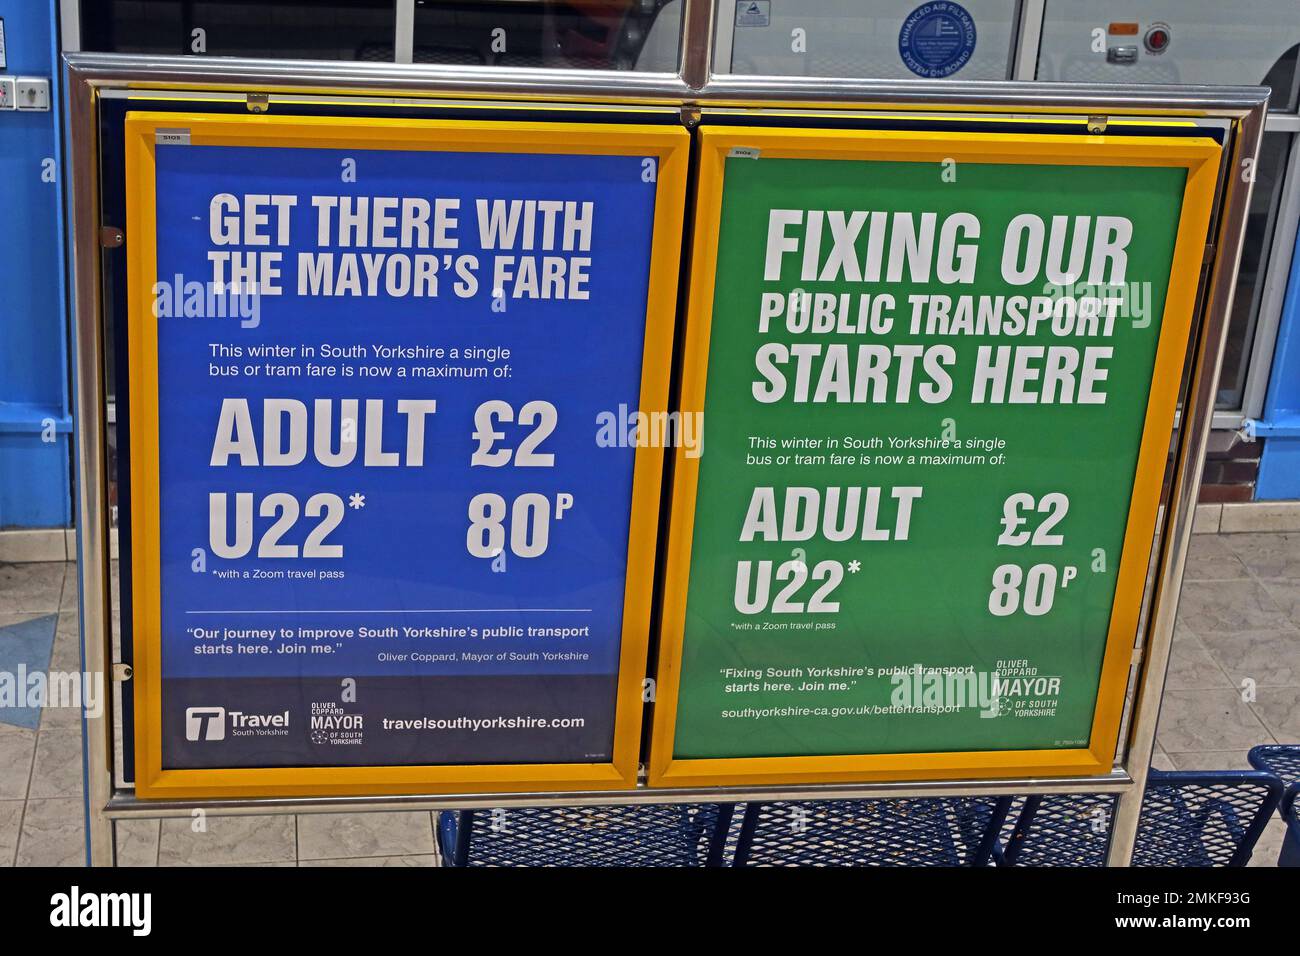 Sheffield and South Yorkshire, regional reduced bus fares, Get There With The Mayors fare - Fixing Our Public Transport Starts here Stock Photo